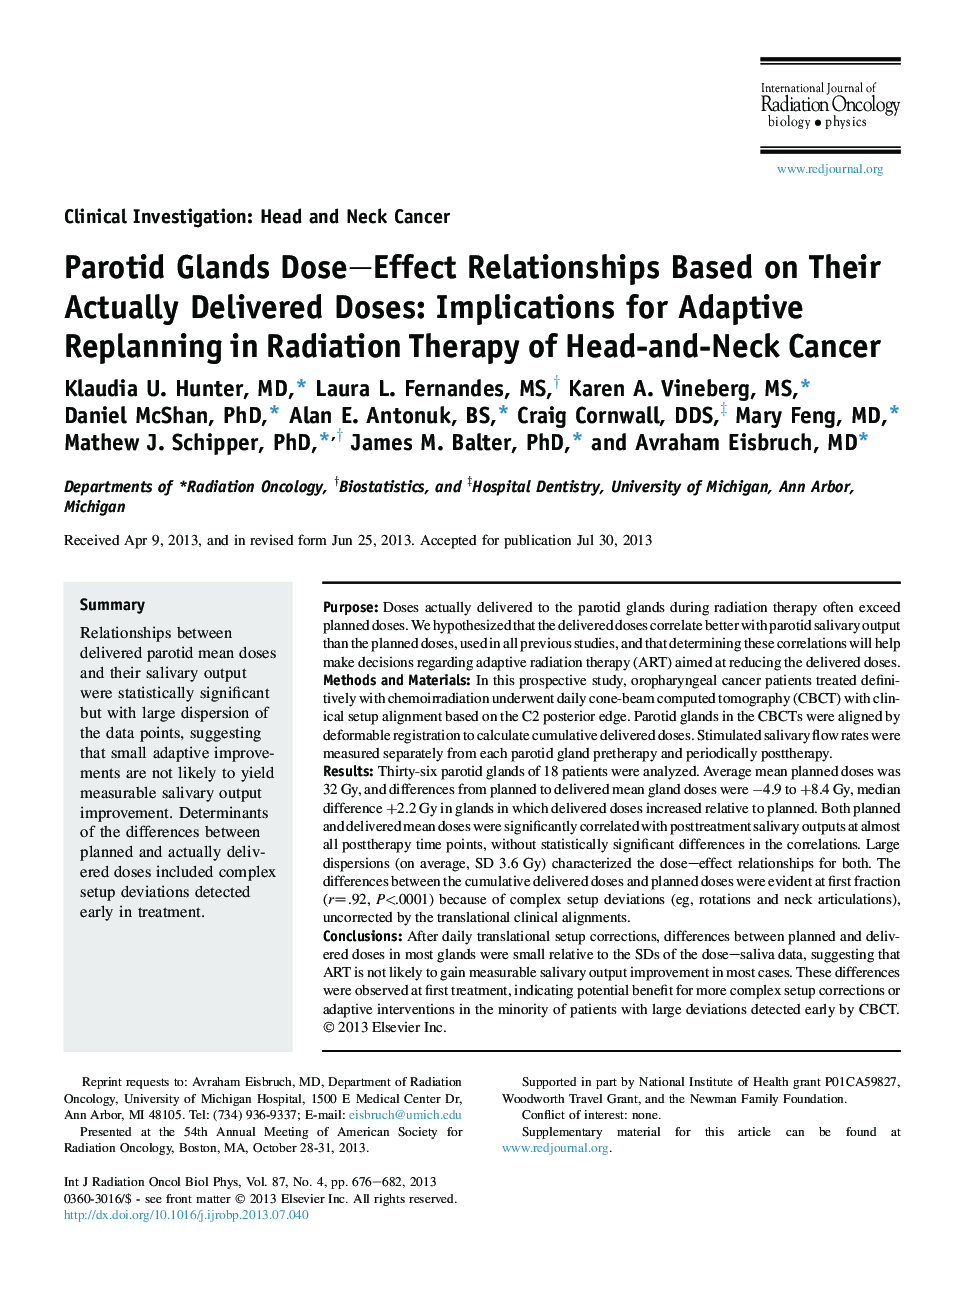 Parotid Glands Dose-Effect Relationships Based on Their Actually Delivered Doses: Implications for Adaptive Replanning in Radiation Therapy of Head-and-Neck Cancer